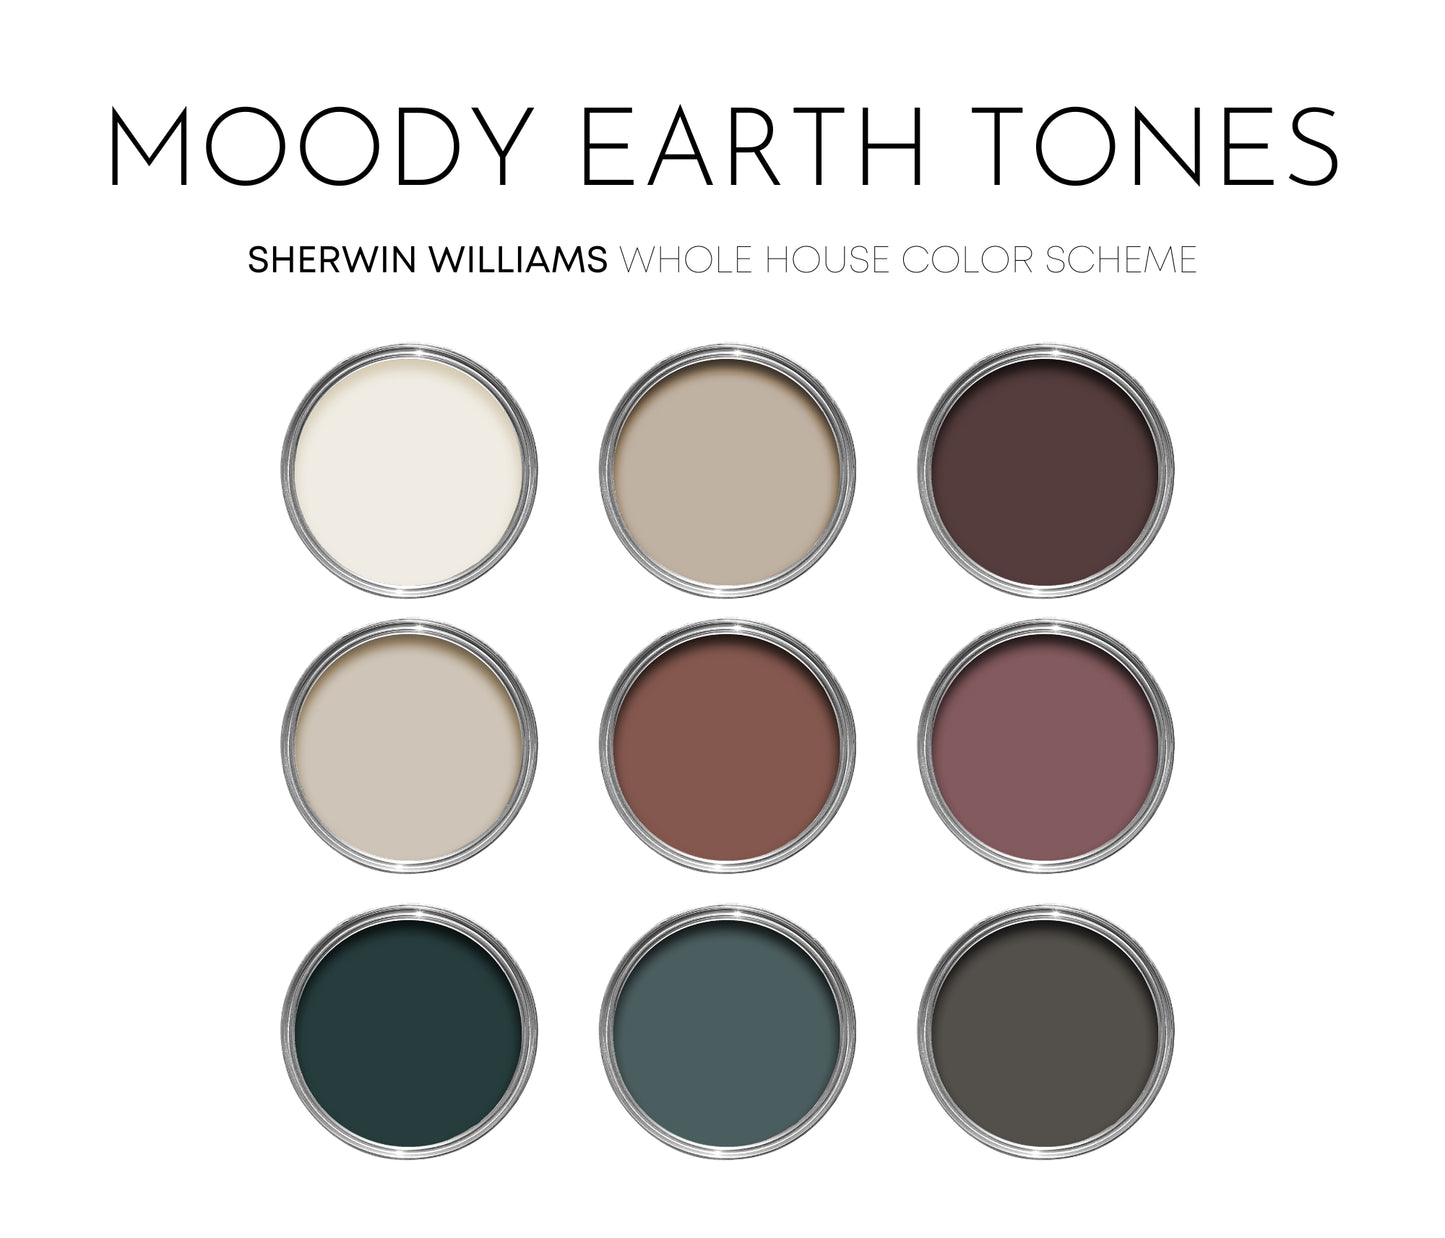 Moody Earth Tones, Sherwin Williams Paint Palette, Earthy Neutrals, Interior Paint Colors, Coordinating Interior Design, Color Palette, Accessible Beige